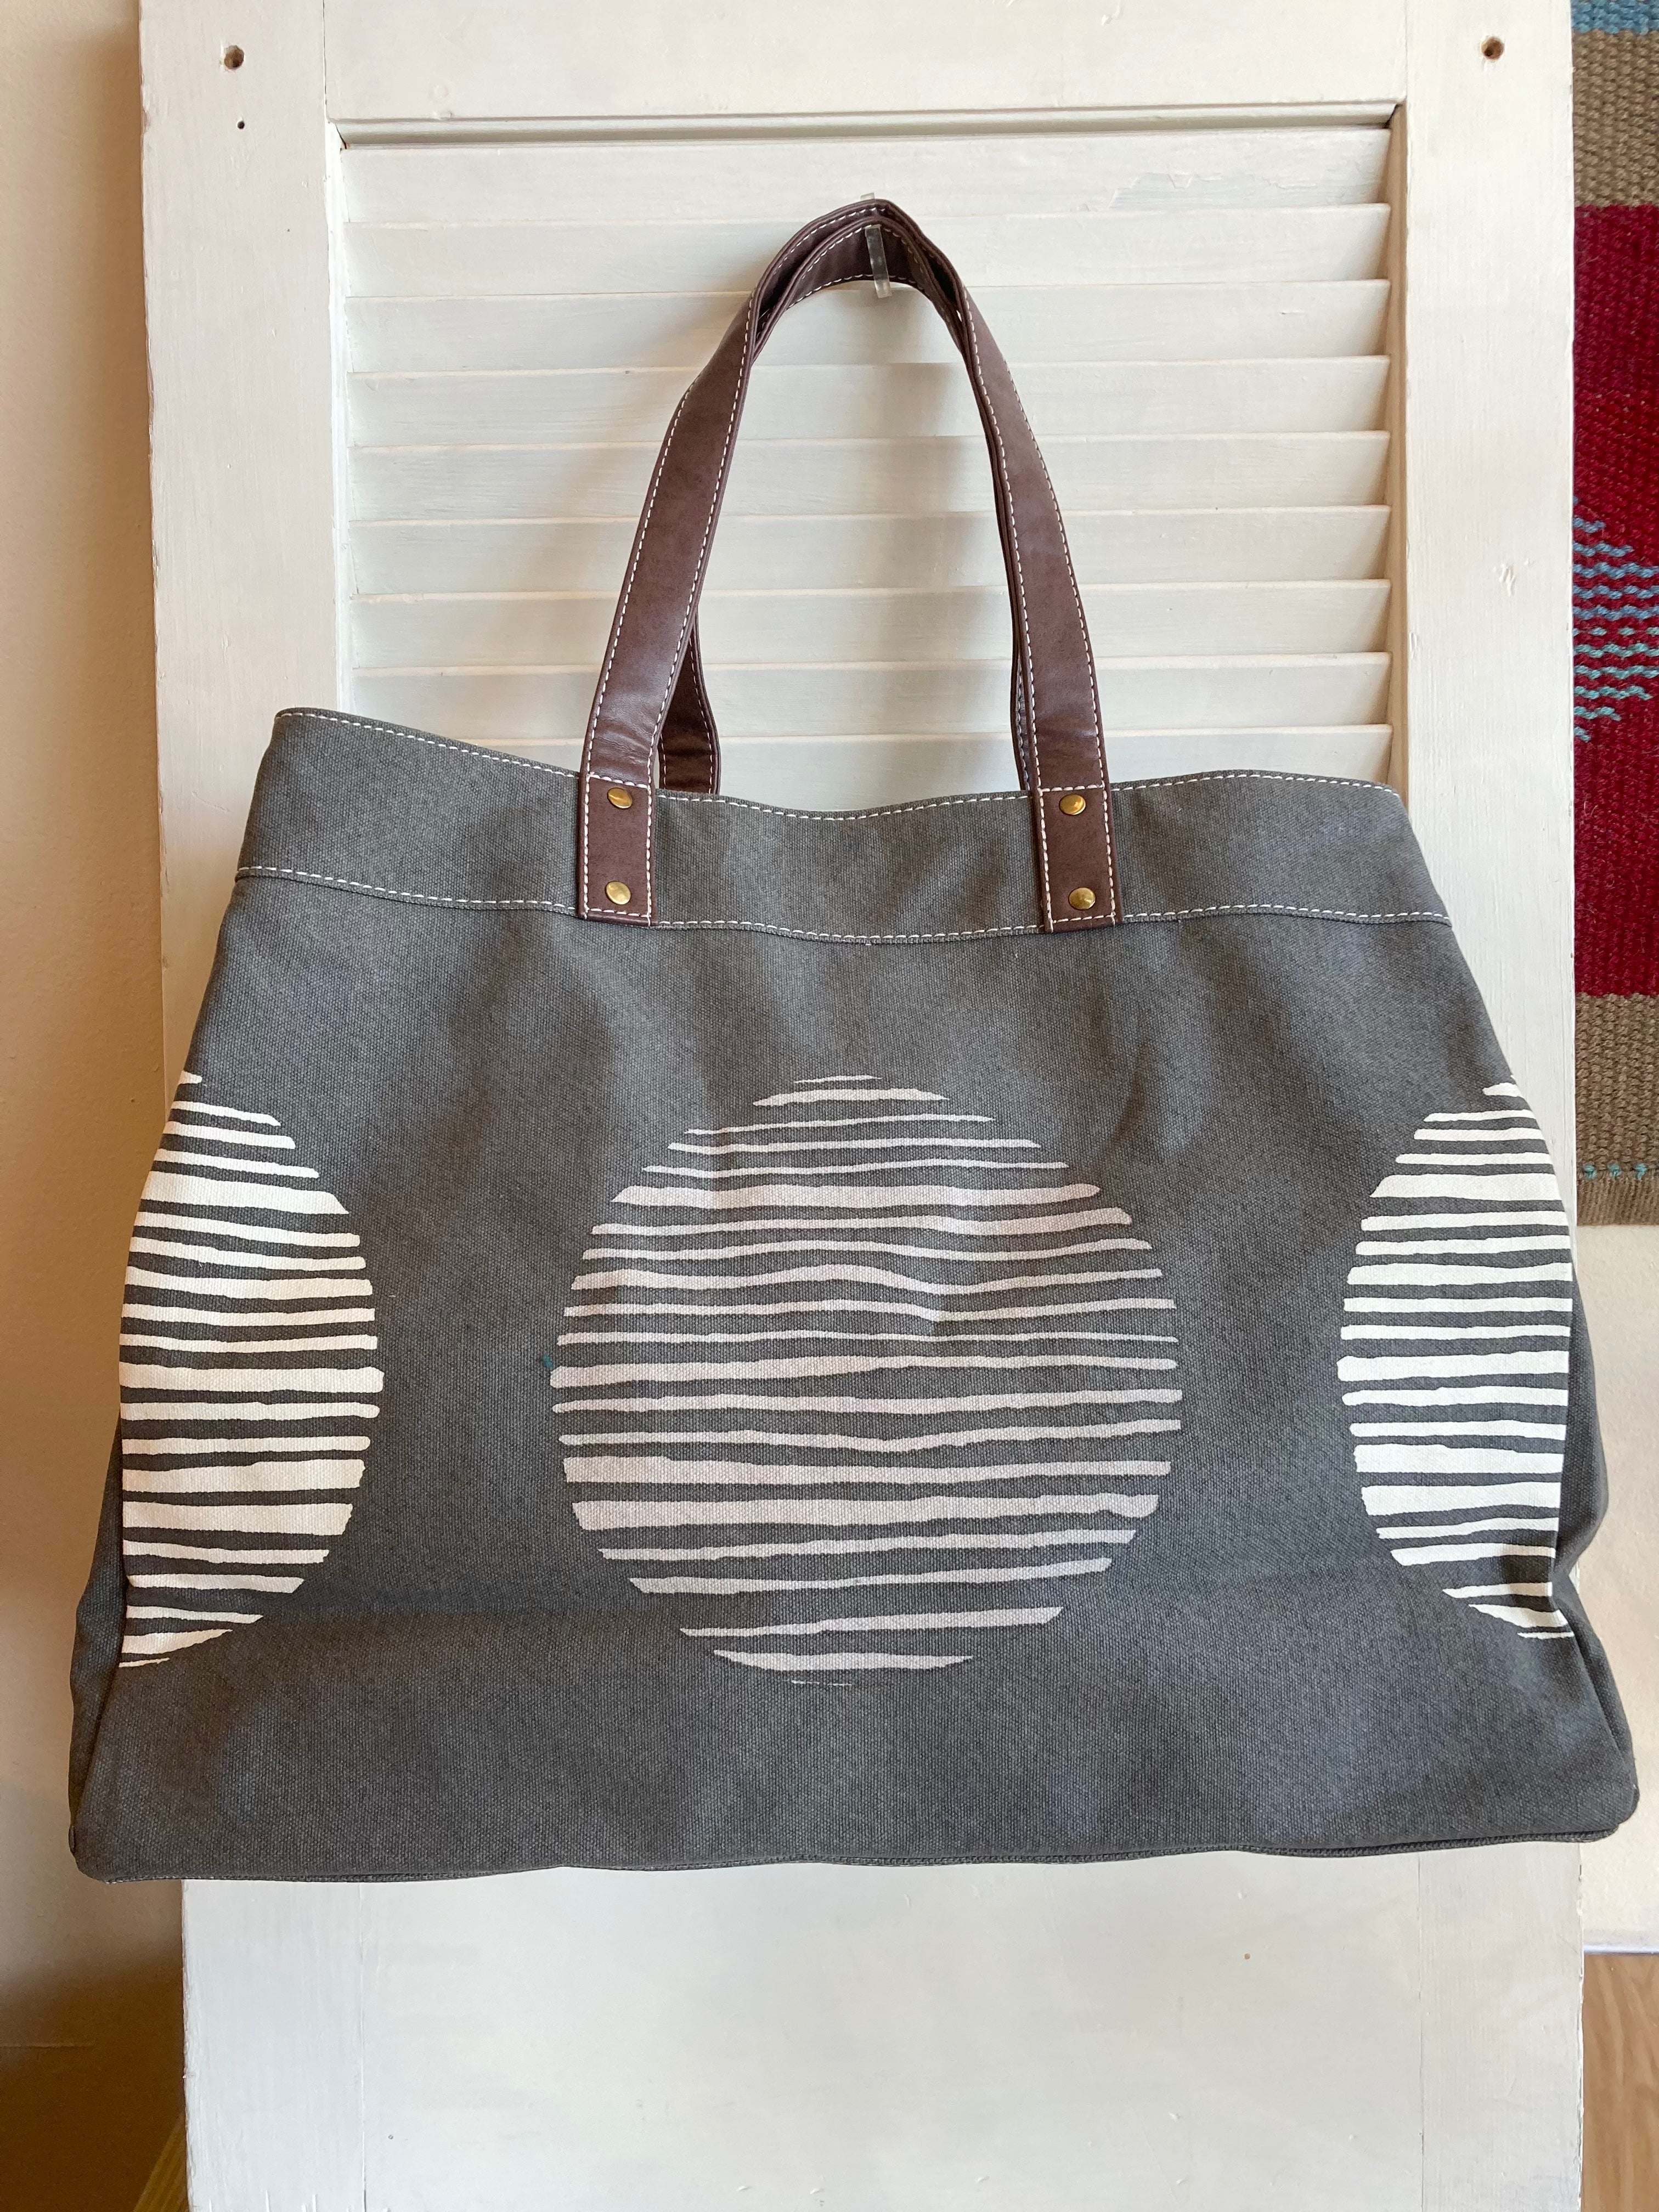 Big Sur - Carryall Tote from MAIKA